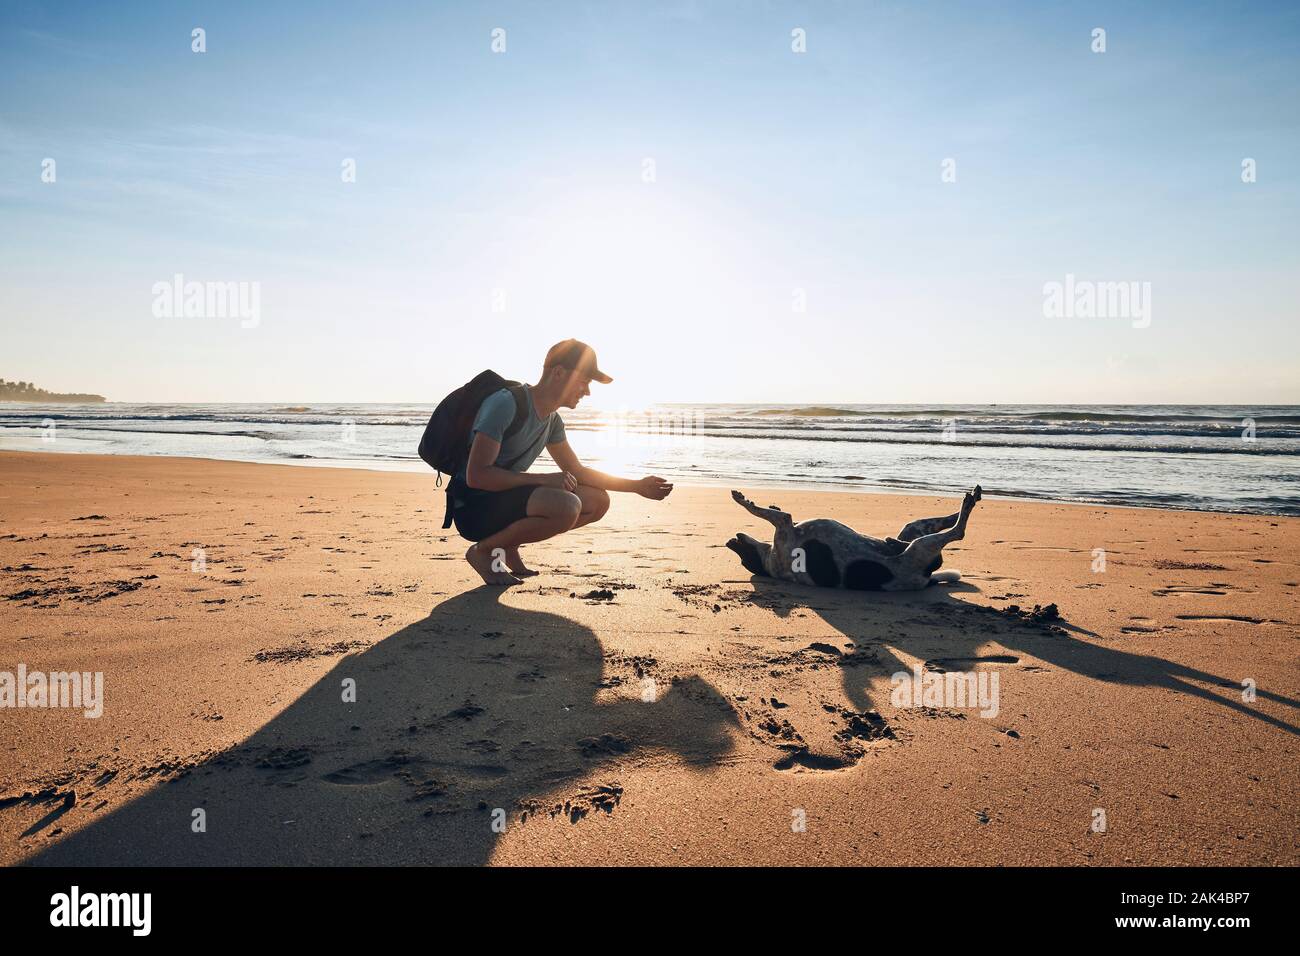 Young man playing with cheerful dog on sand beach against sea, Sri Lanka. Stock Photo